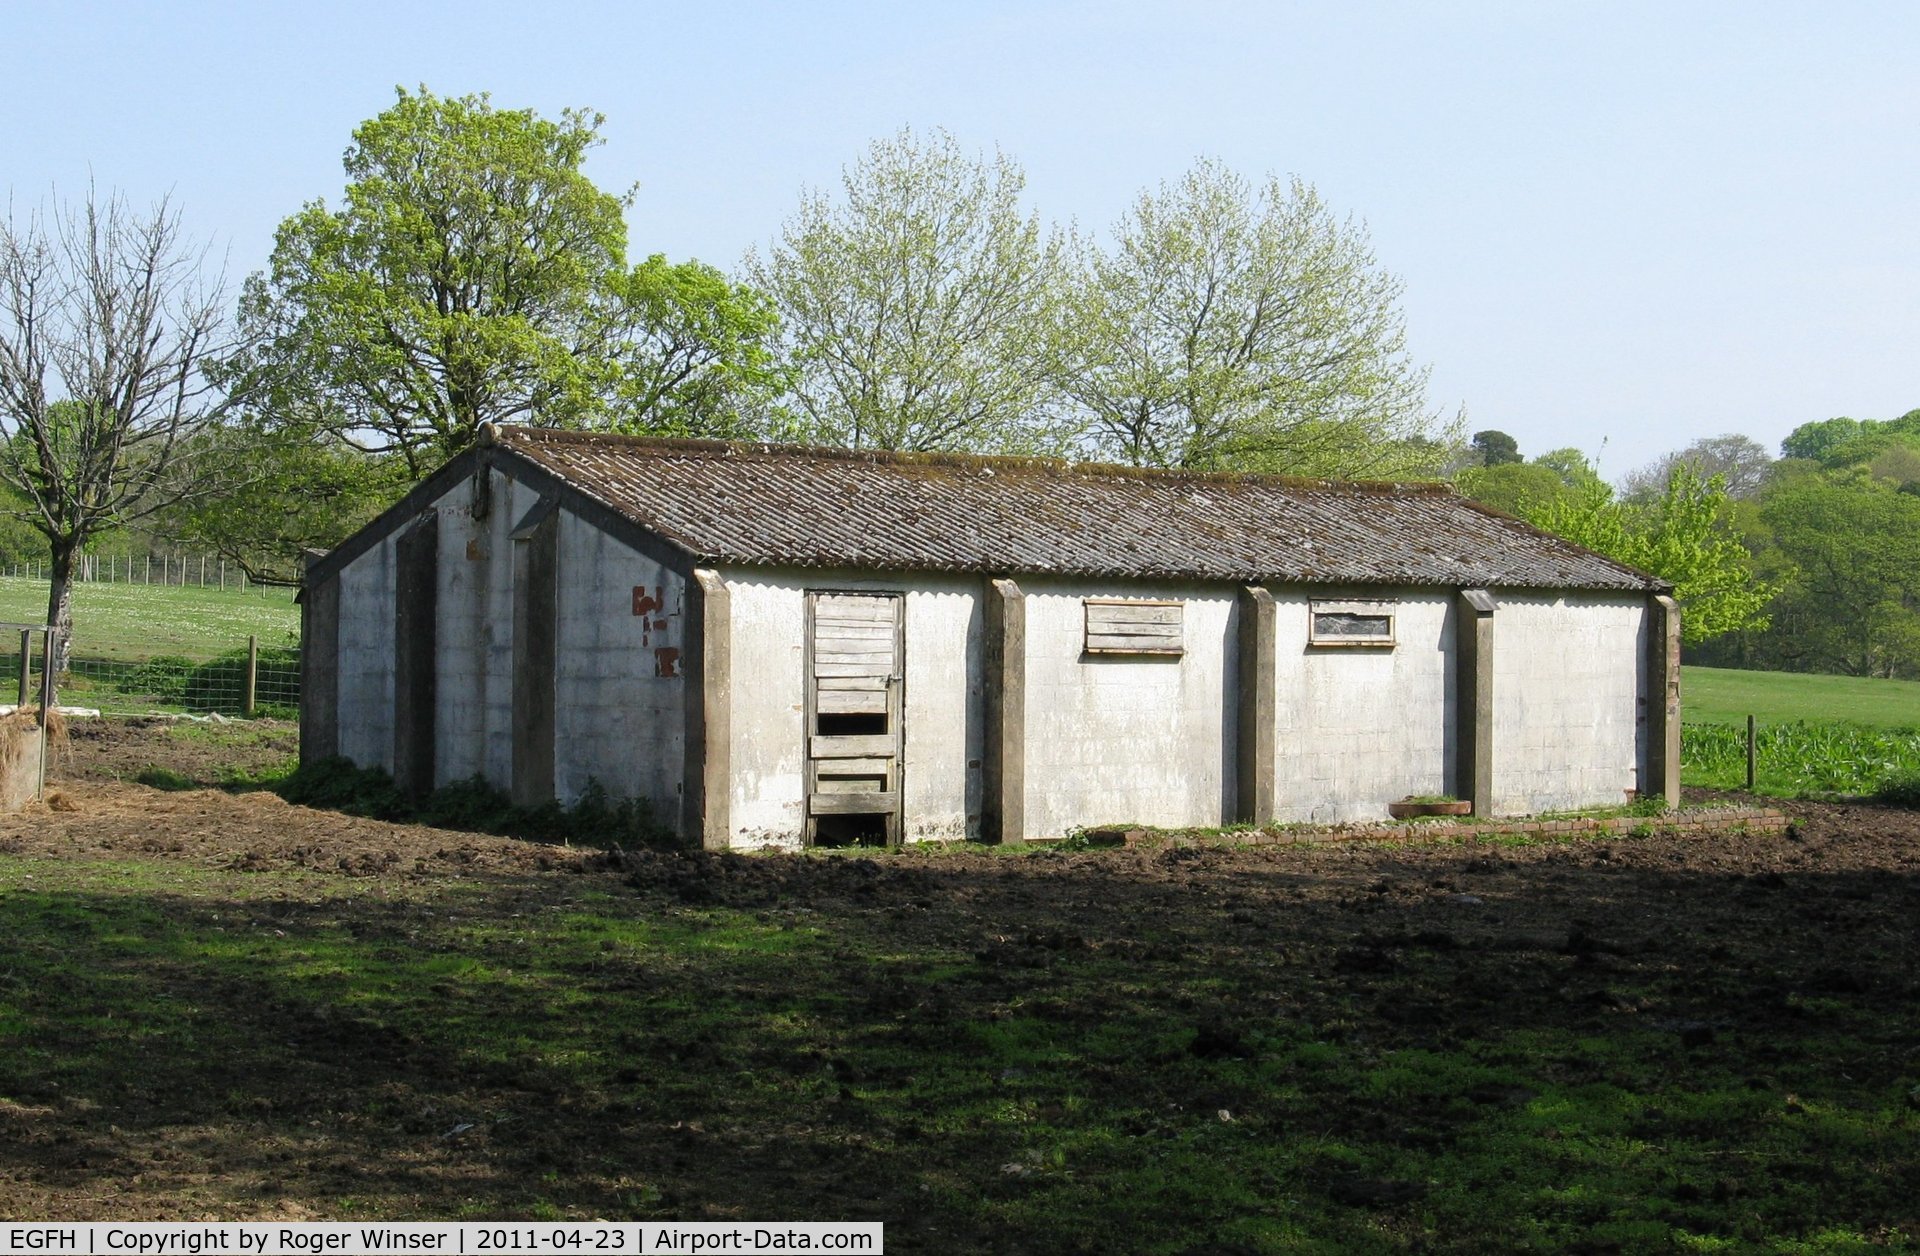 Swansea Airport, Swansea, Wales United Kingdom (EGFH) - Former RAF Works Services Hut on the former RAF Fairwood Common Dispersed Site 2.